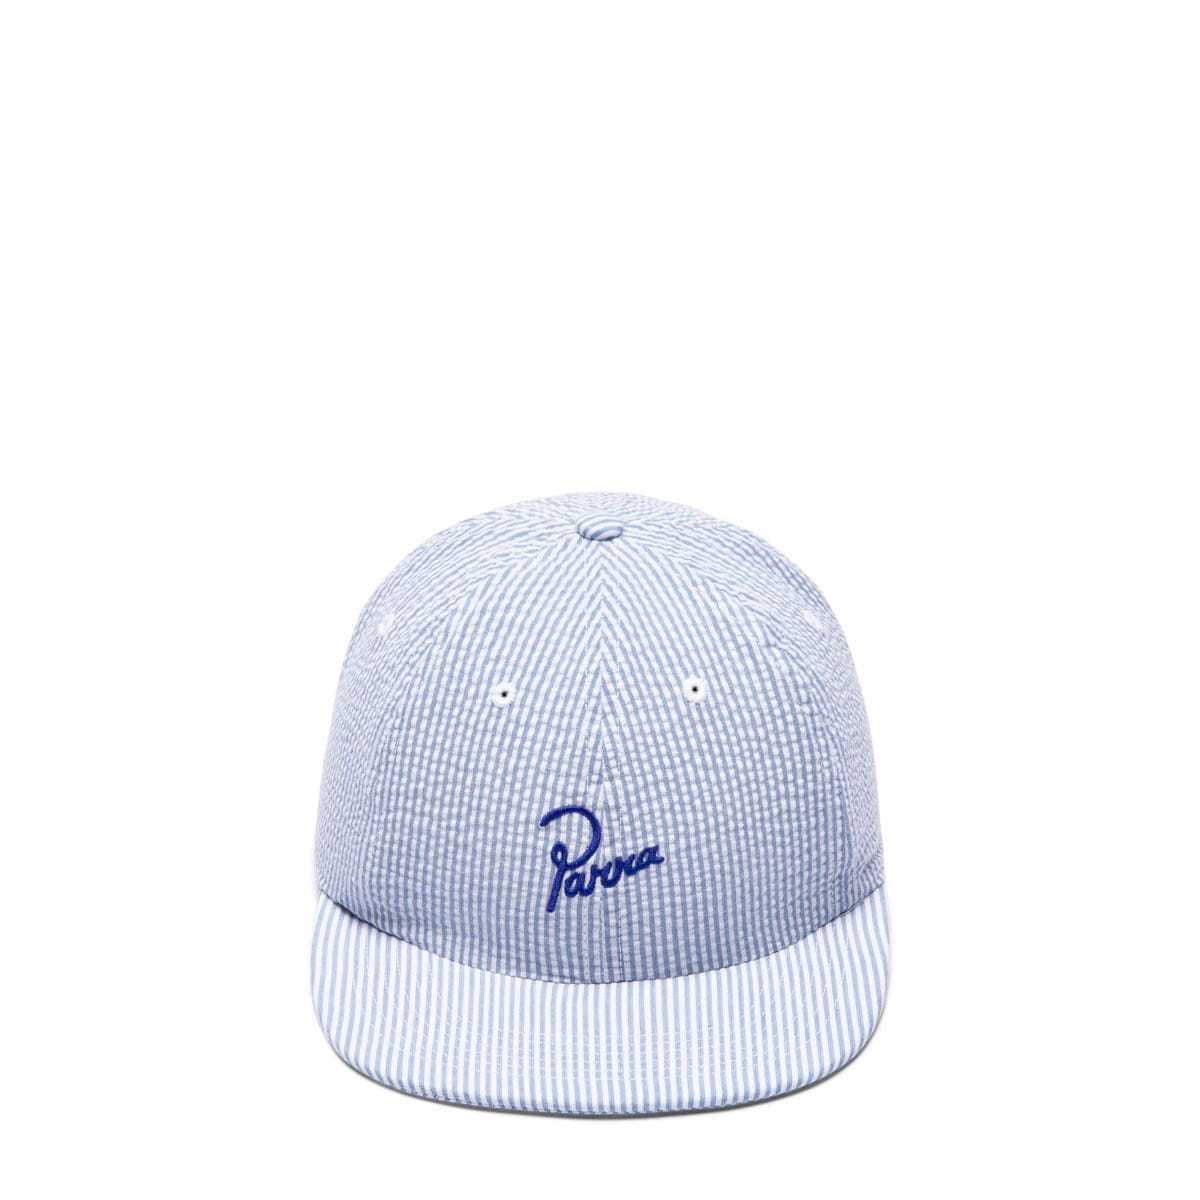 By Parra Headwear WHITE BLUE / O/S CLASSIC LOGO 6 PANEL HAT